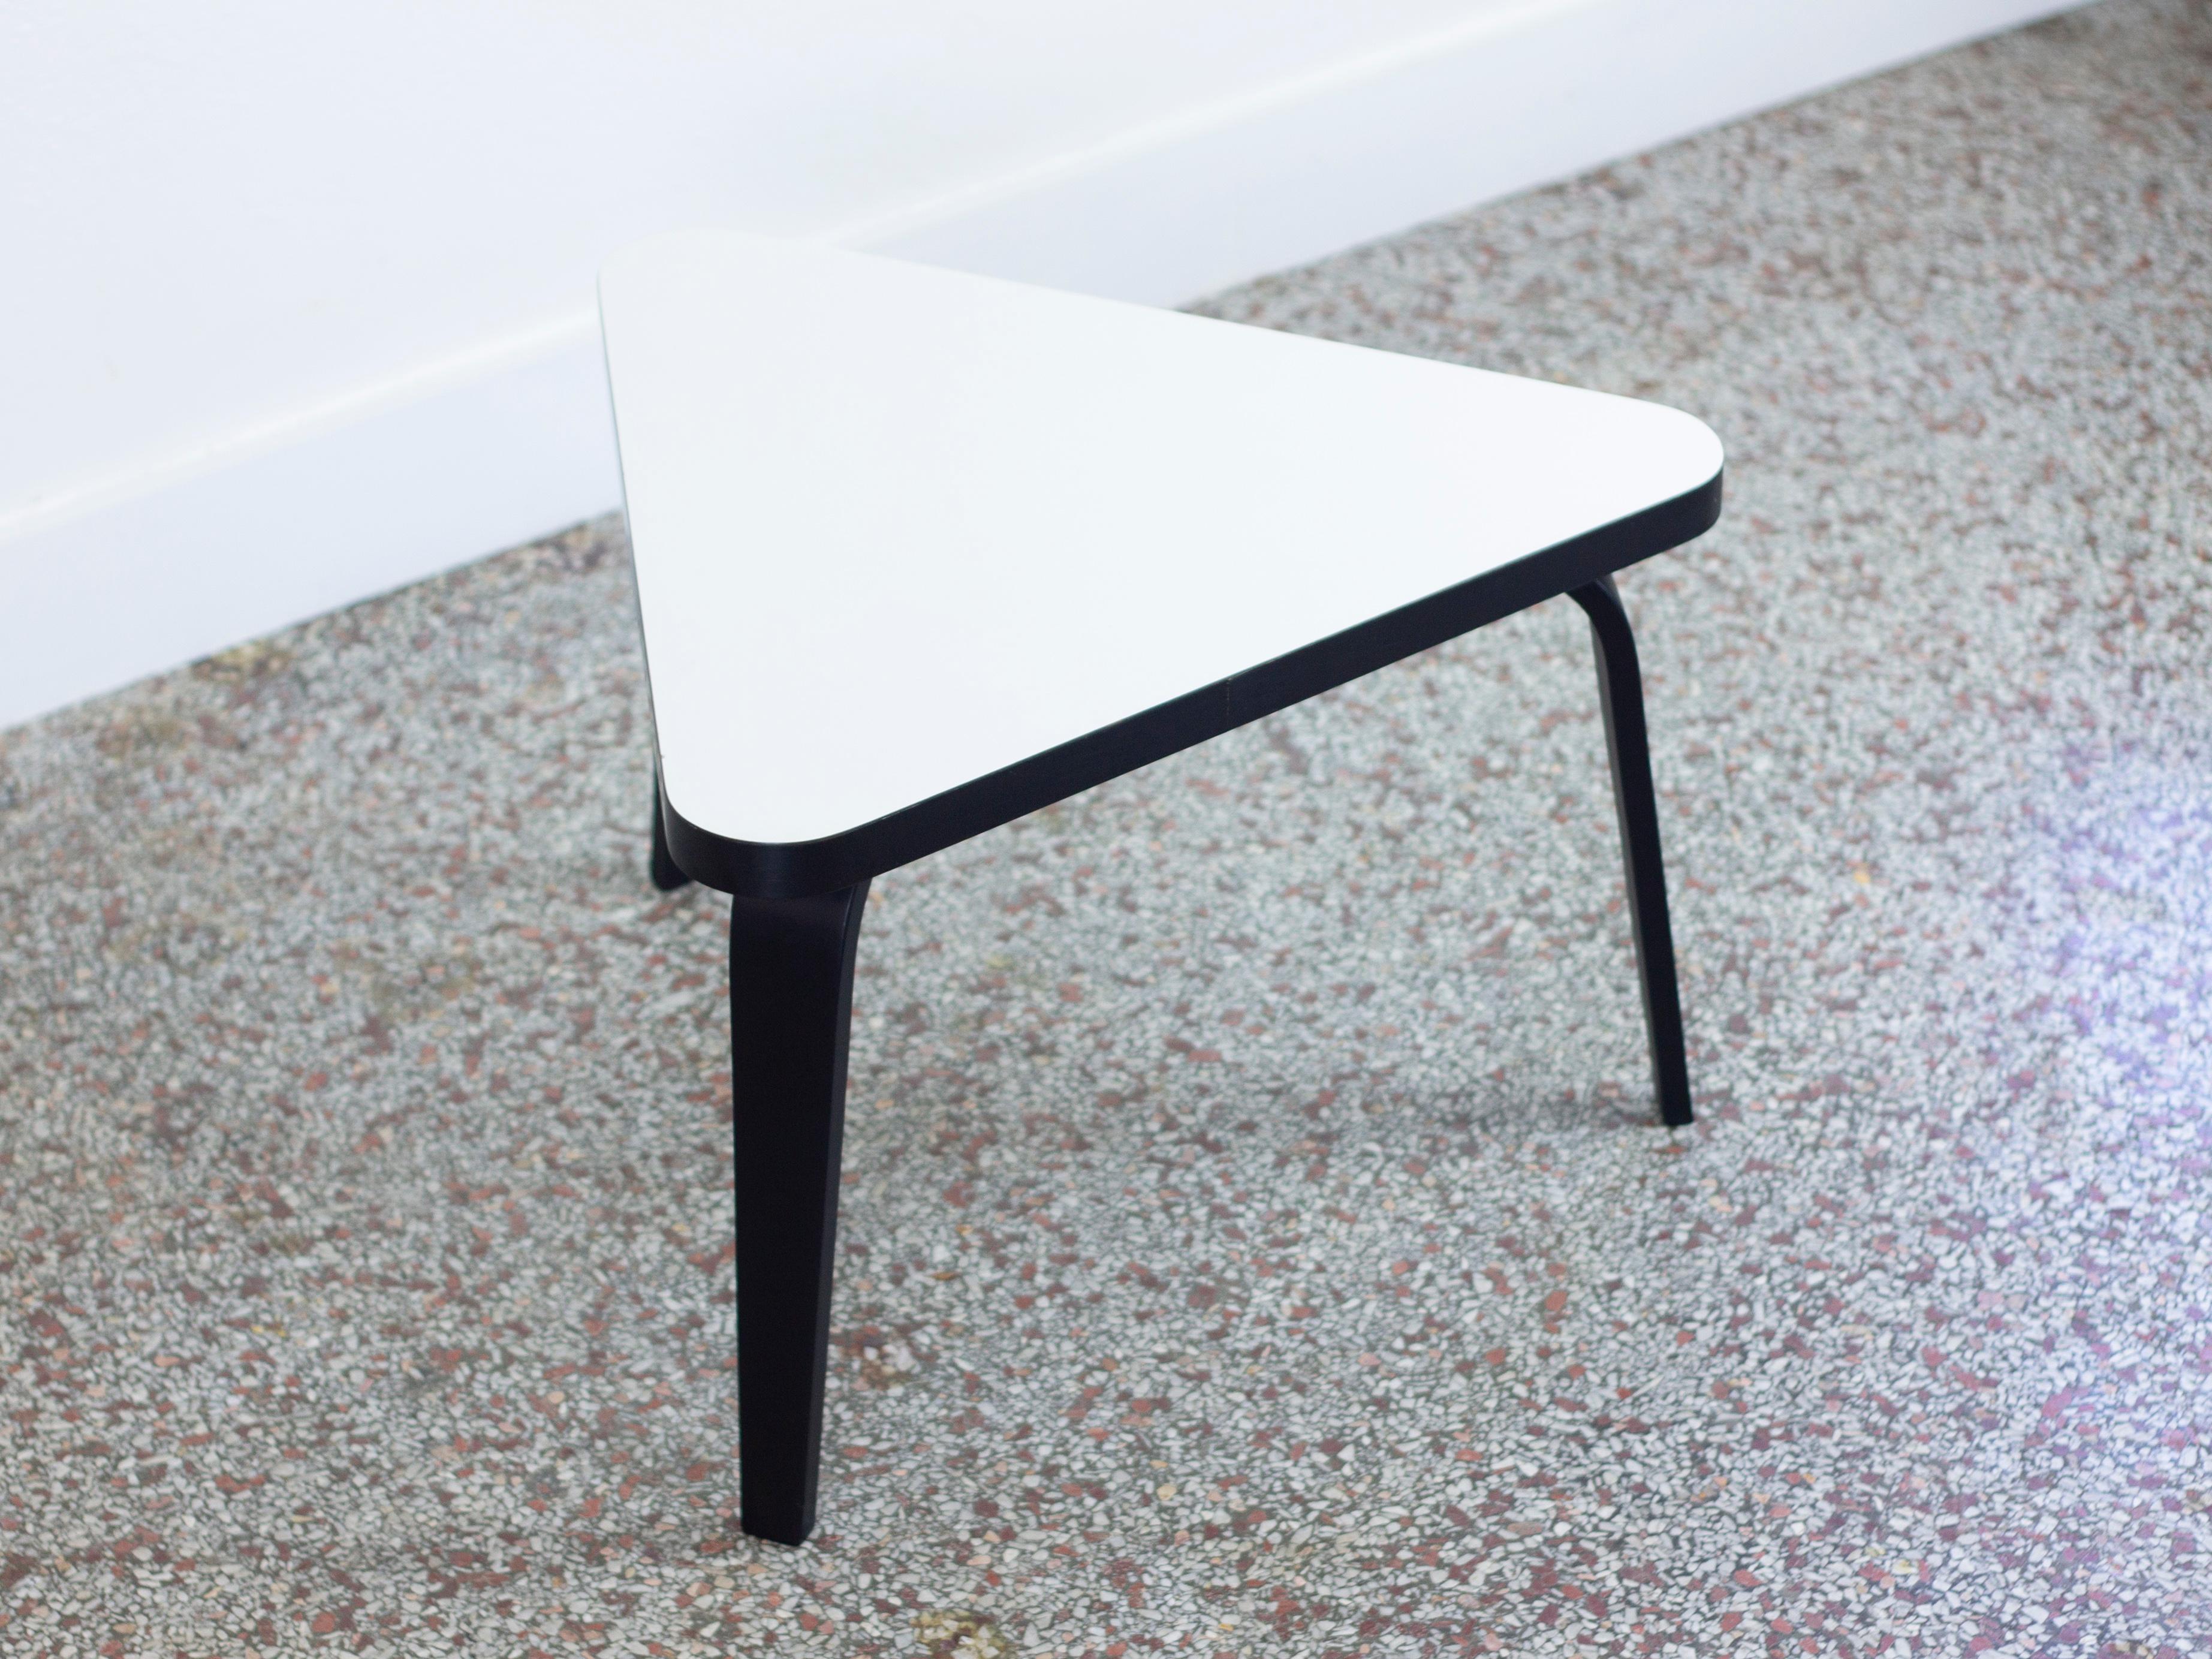 Vintage Mid-Century Modern triangular side table with white laminate top and black bentwood legs by Thonet.